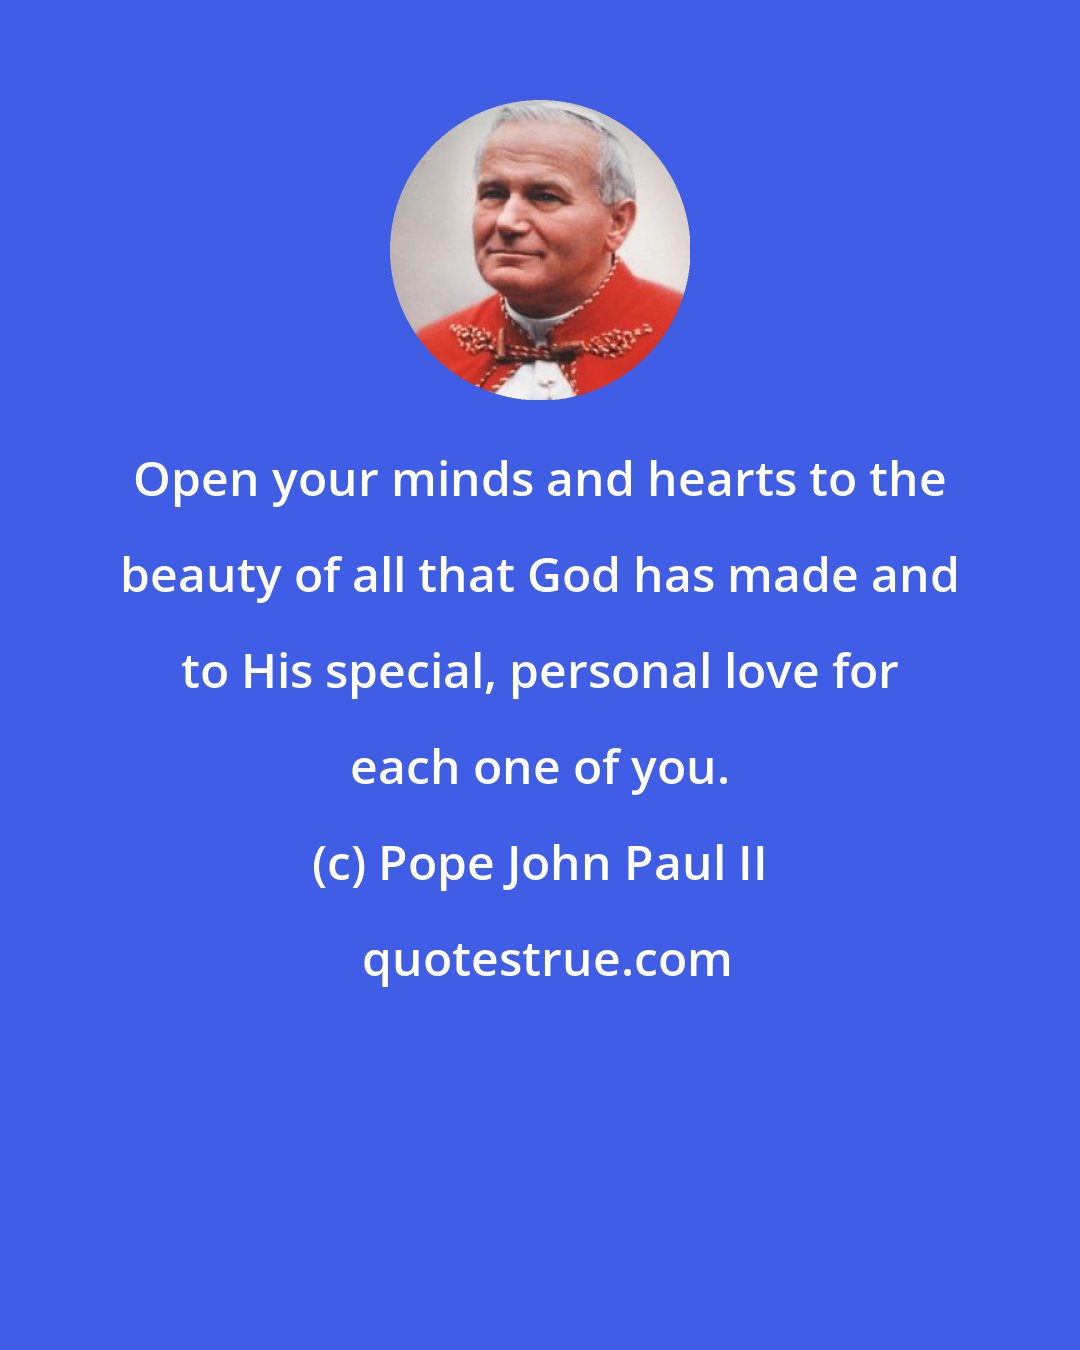 Pope John Paul II: Open your minds and hearts to the beauty of all that God has made and to His special, personal love for each one of you.